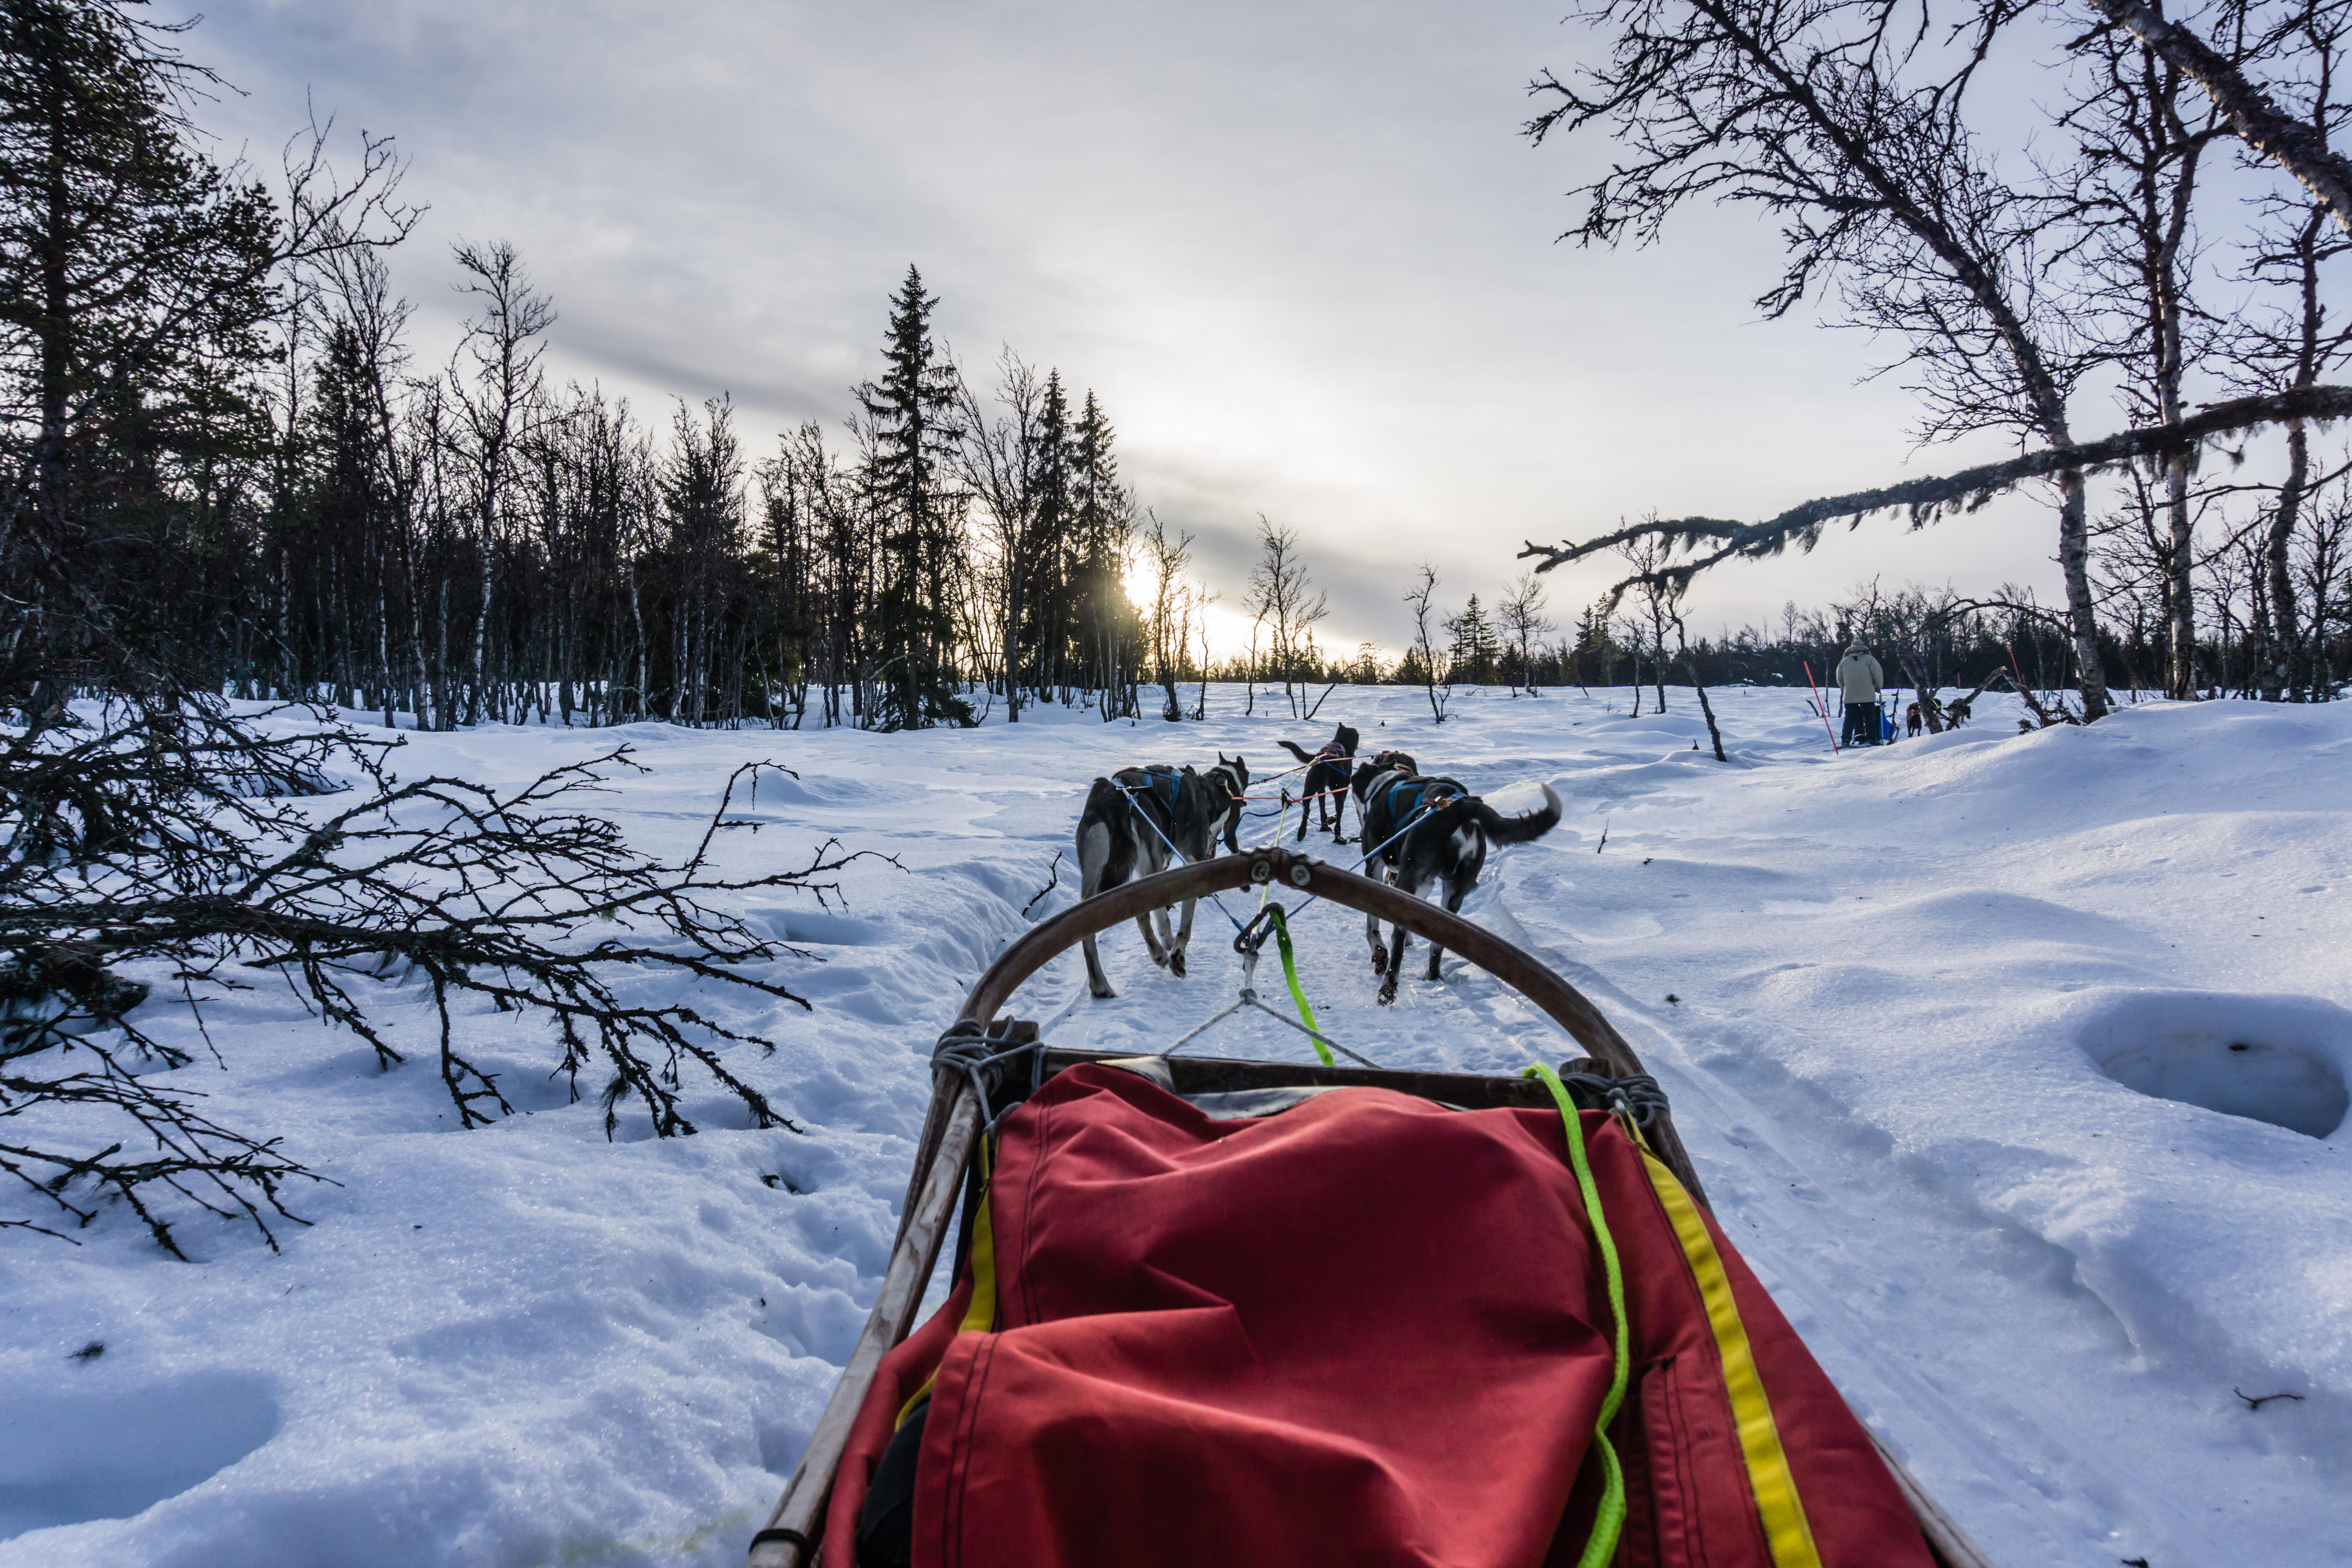 For added Narnia factor in Norway, take a sleigh ride through the village and into the woods